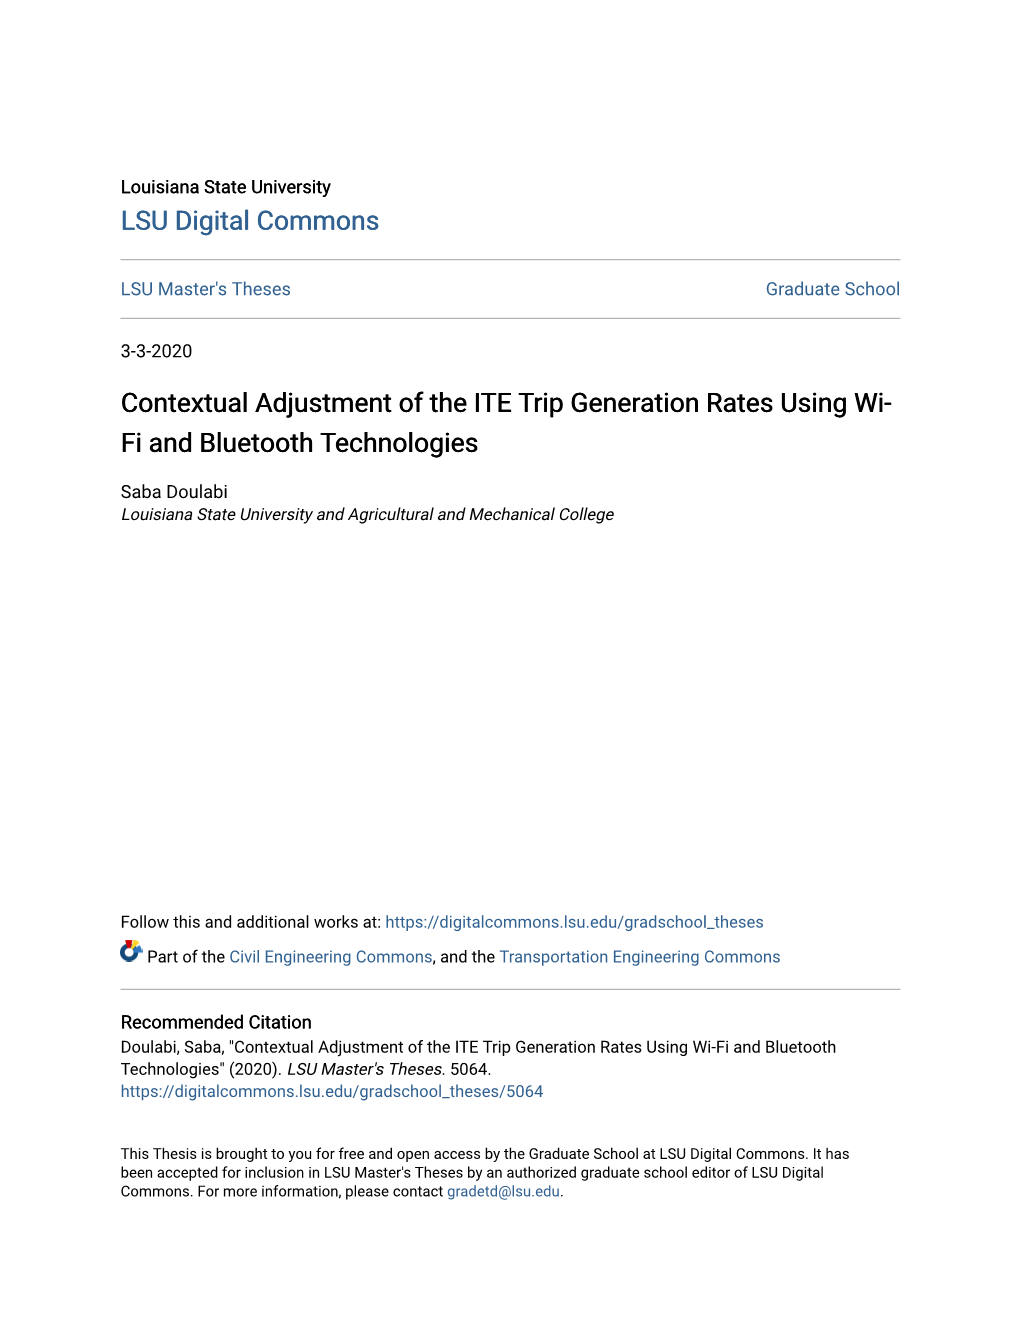 Contextual Adjustment of the ITE Trip Generation Rates Using Wi-Fi and Bluetooth Technologies" (2020)